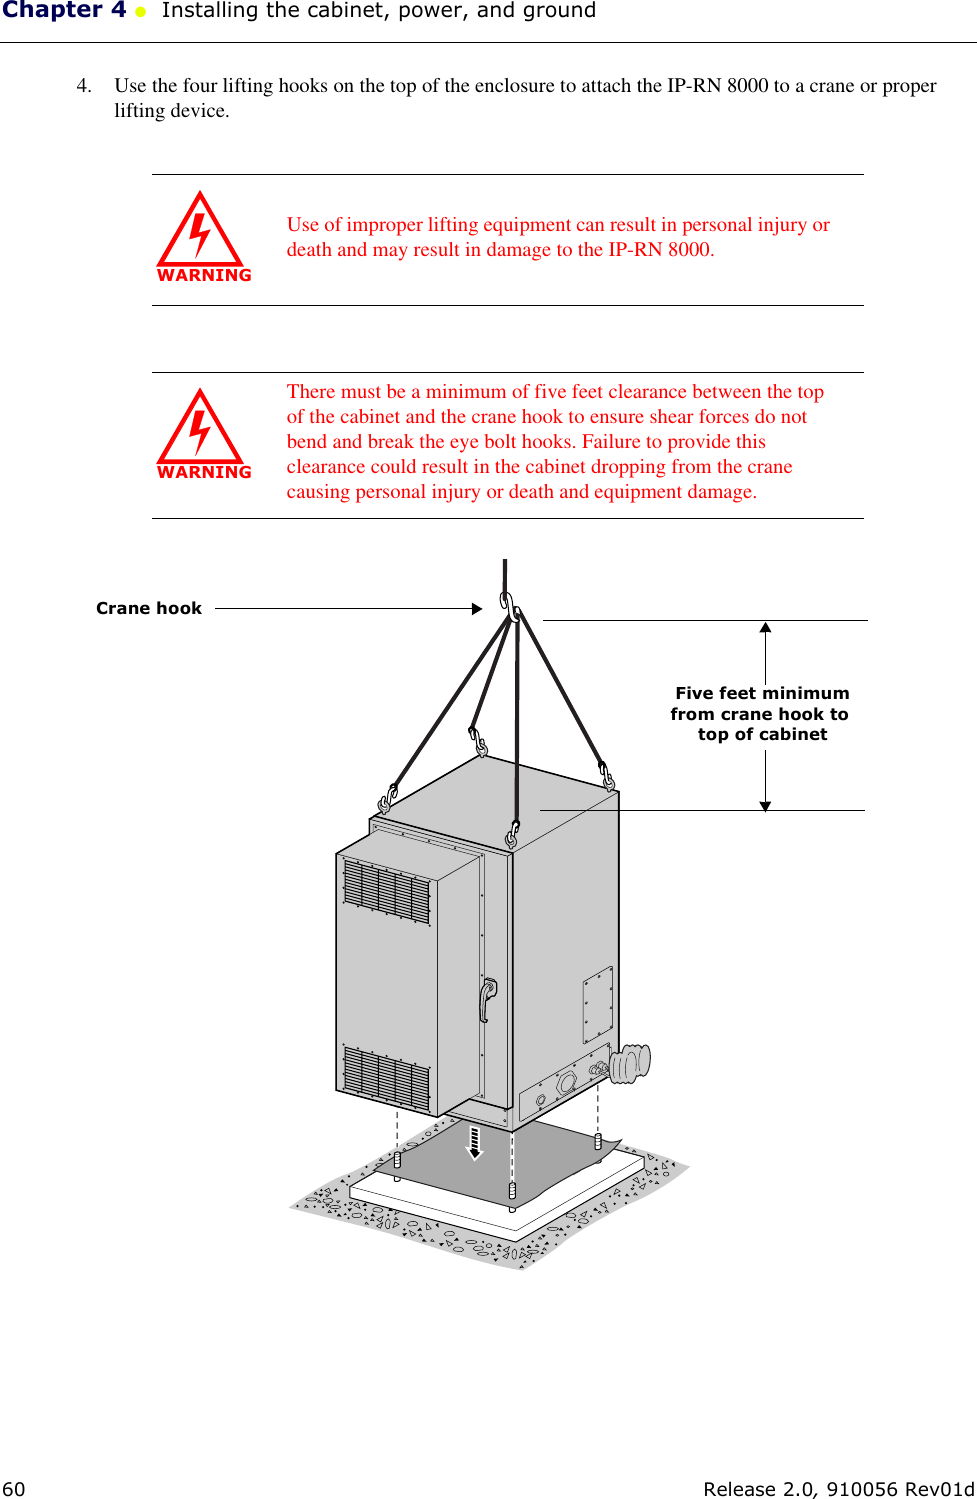 Chapter 4 ●  Installing the cabinet, power, and ground60 Release 2.0, 910056 Rev01d4. Use the four lifting hooks on the top of the enclosure to attach the IP-RN 8000 to a crane or proper lifting device. WARNINGUse of improper lifting equipment can result in personal injury or death and may result in damage to the IP-RN 8000.WARNINGThere must be a minimum of five feet clearance between the top of the cabinet and the crane hook to ensure shear forces do not bend and break the eye bolt hooks. Failure to provide this clearance could result in the cabinet dropping from the crane causing personal injury or death and equipment damage. Five feet minimumfrom crane hook to top of cabinetCrane hook